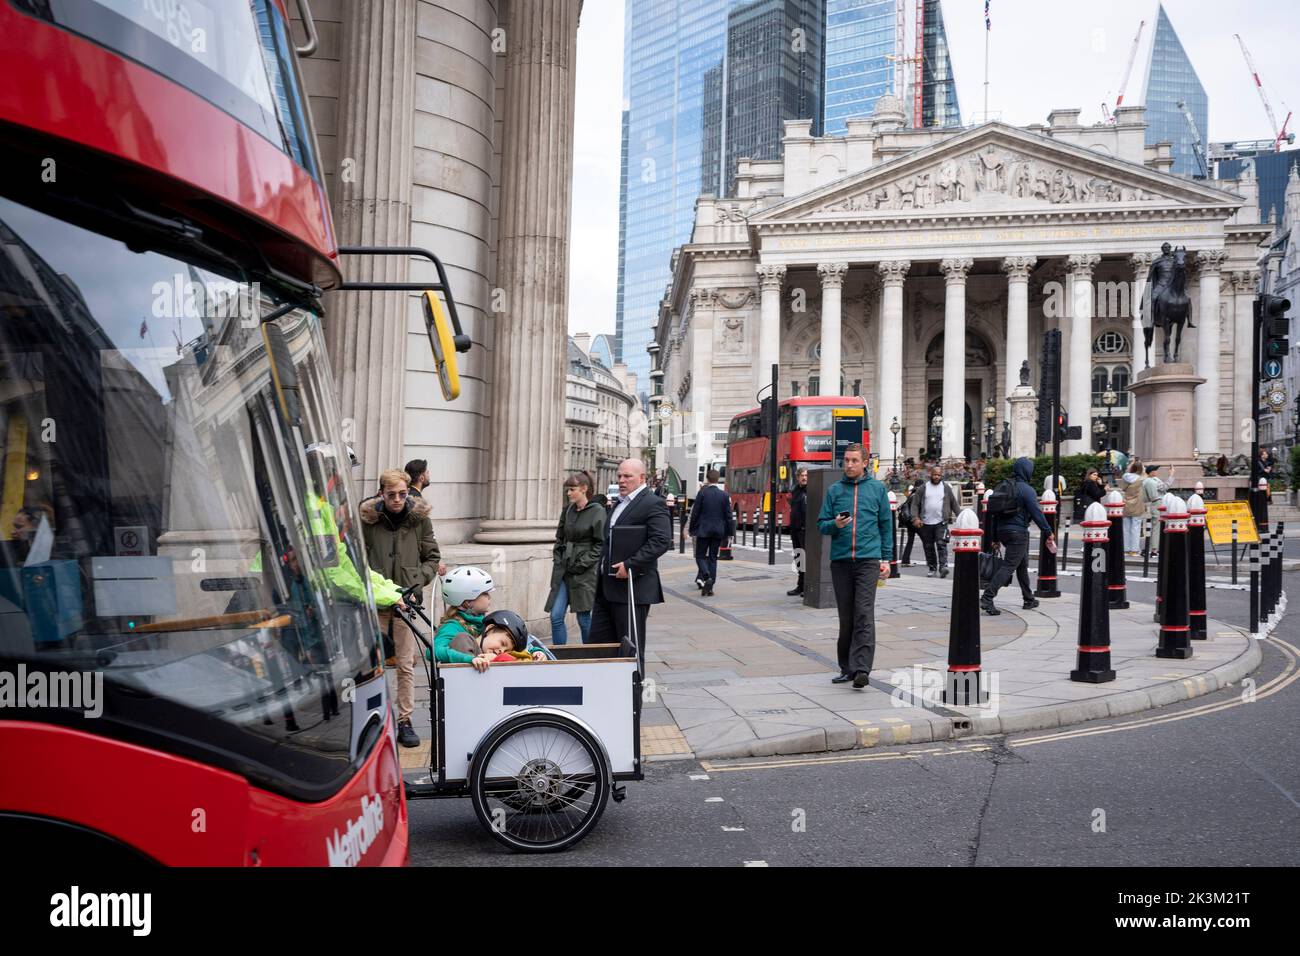 A bus overtakes a woman and two children being carried in the bucket of a cargo bike, past the Bank of England at the junction of Princes and Threadneedle Streets EC2 in the City of London, on 26th September 2022, in London, England. Stock Photo